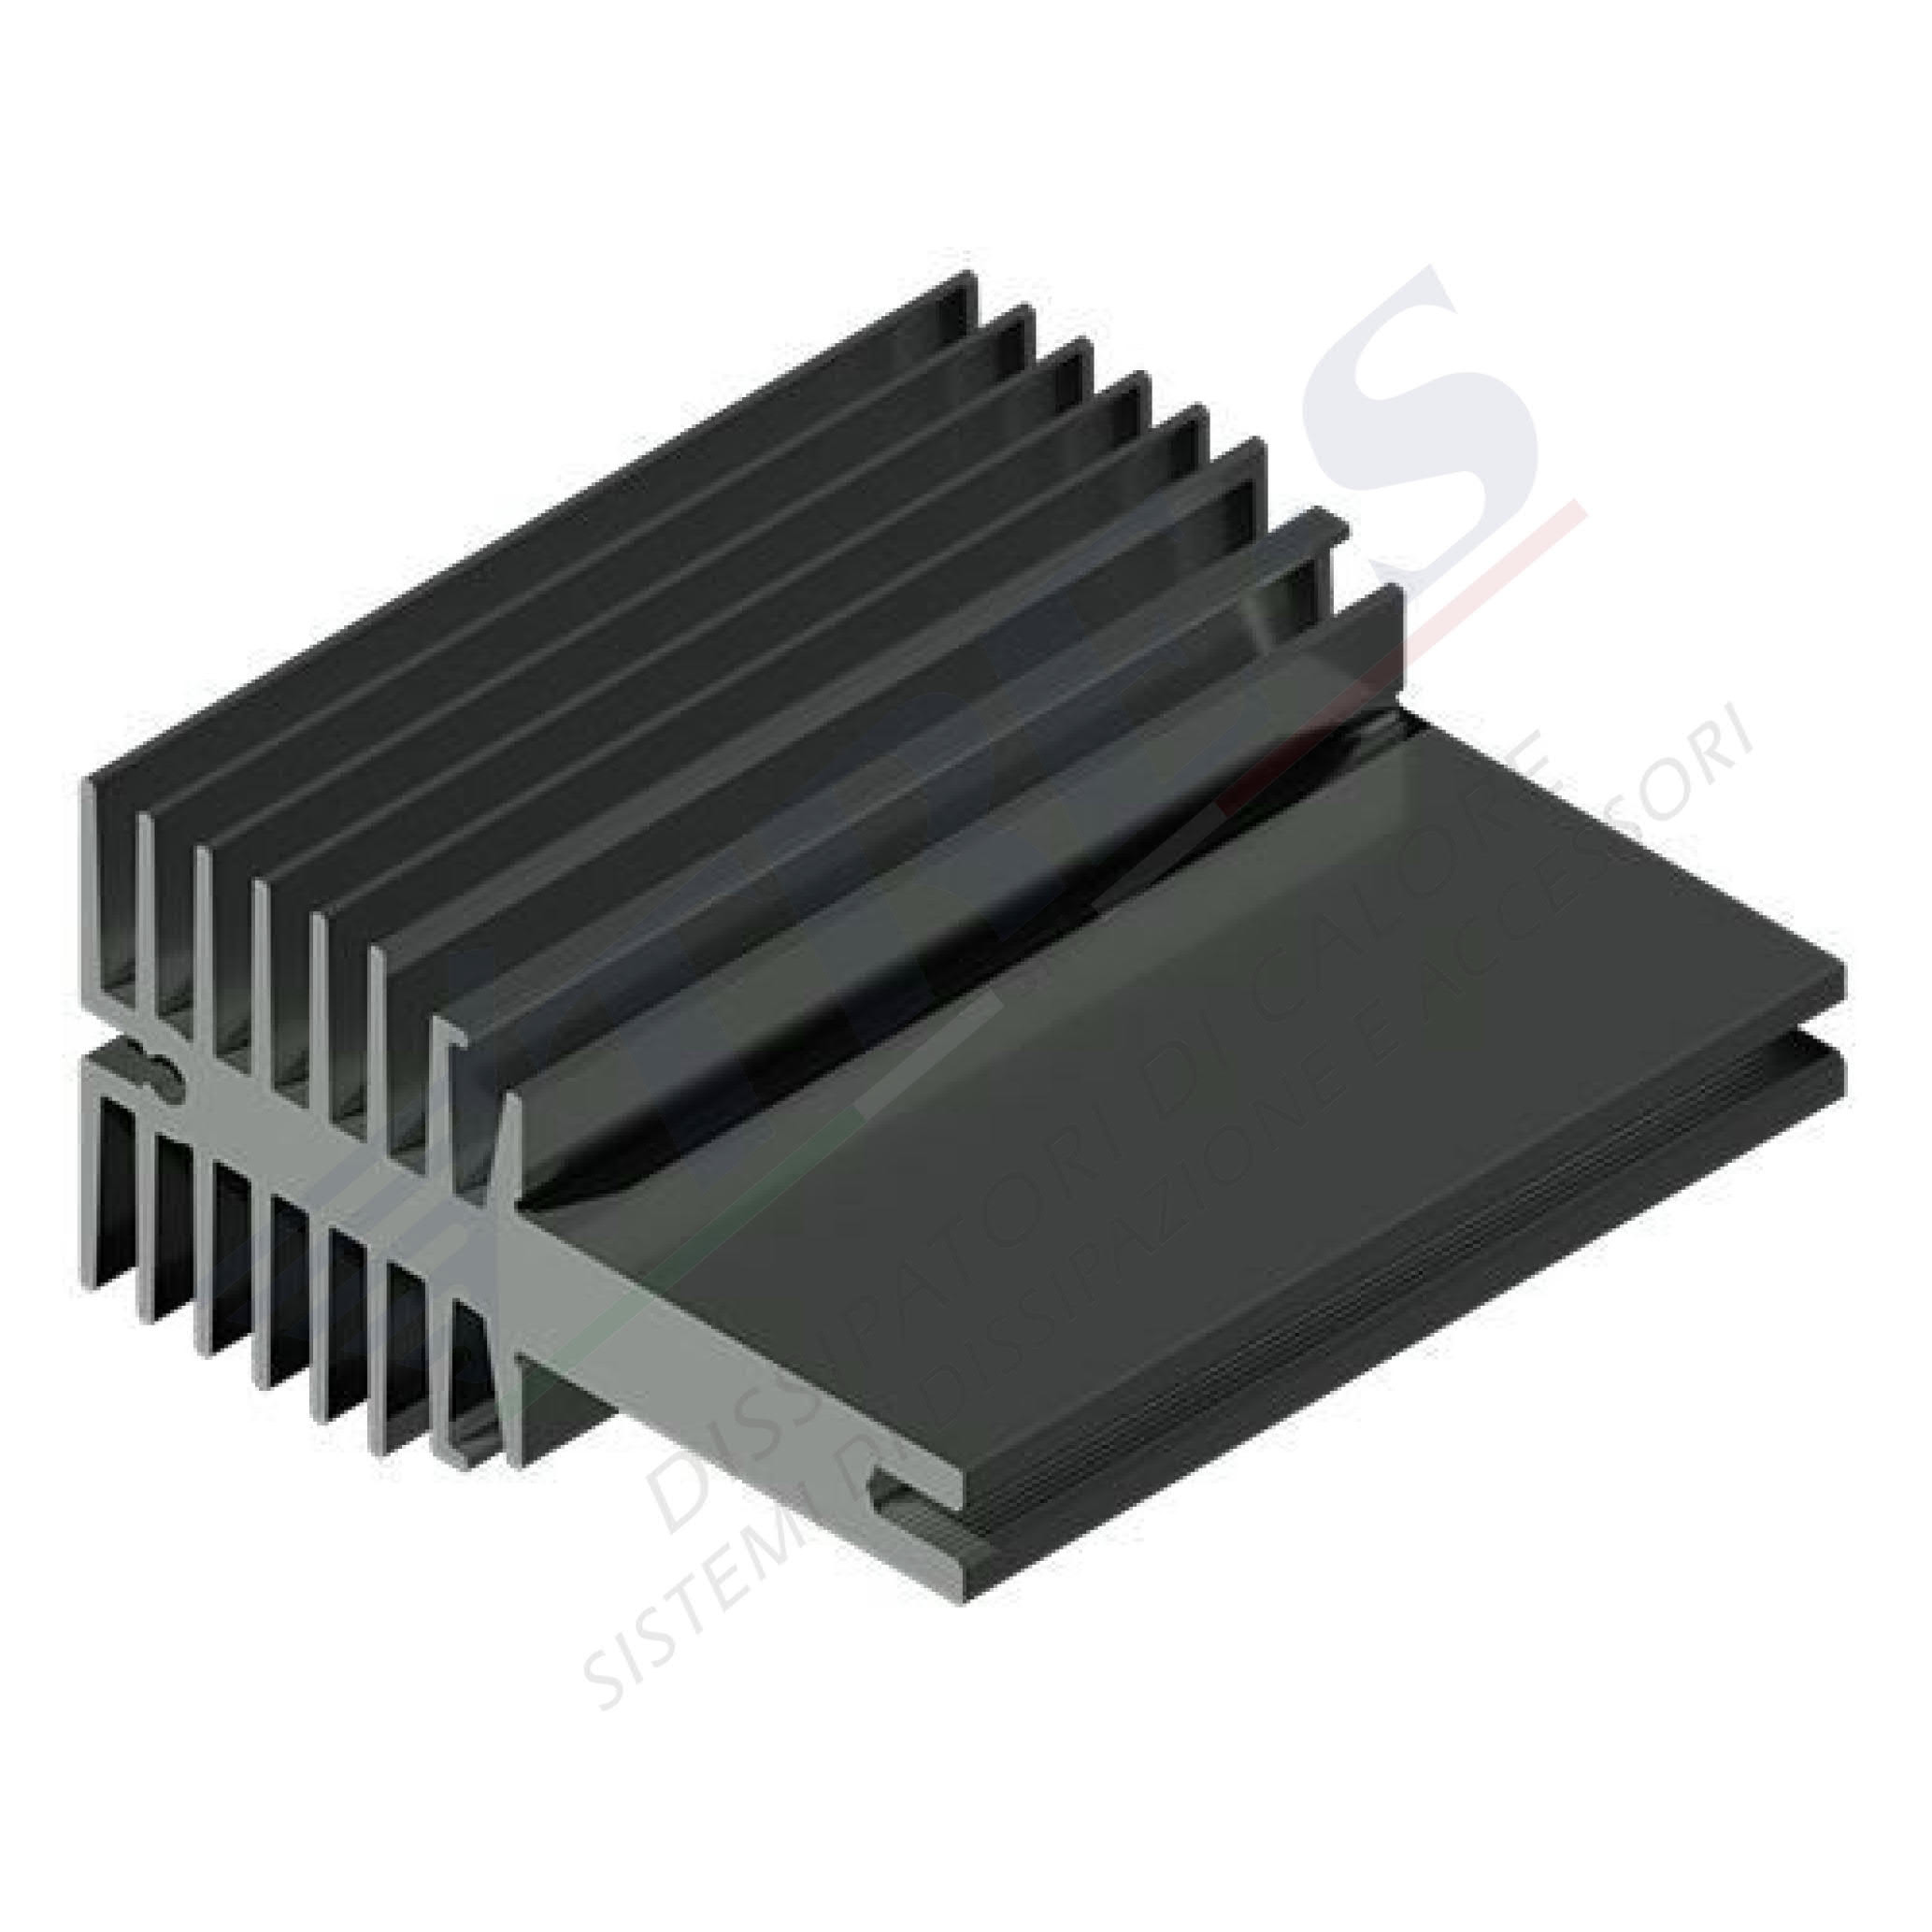 PRO1297 - Heat sinks with clip system